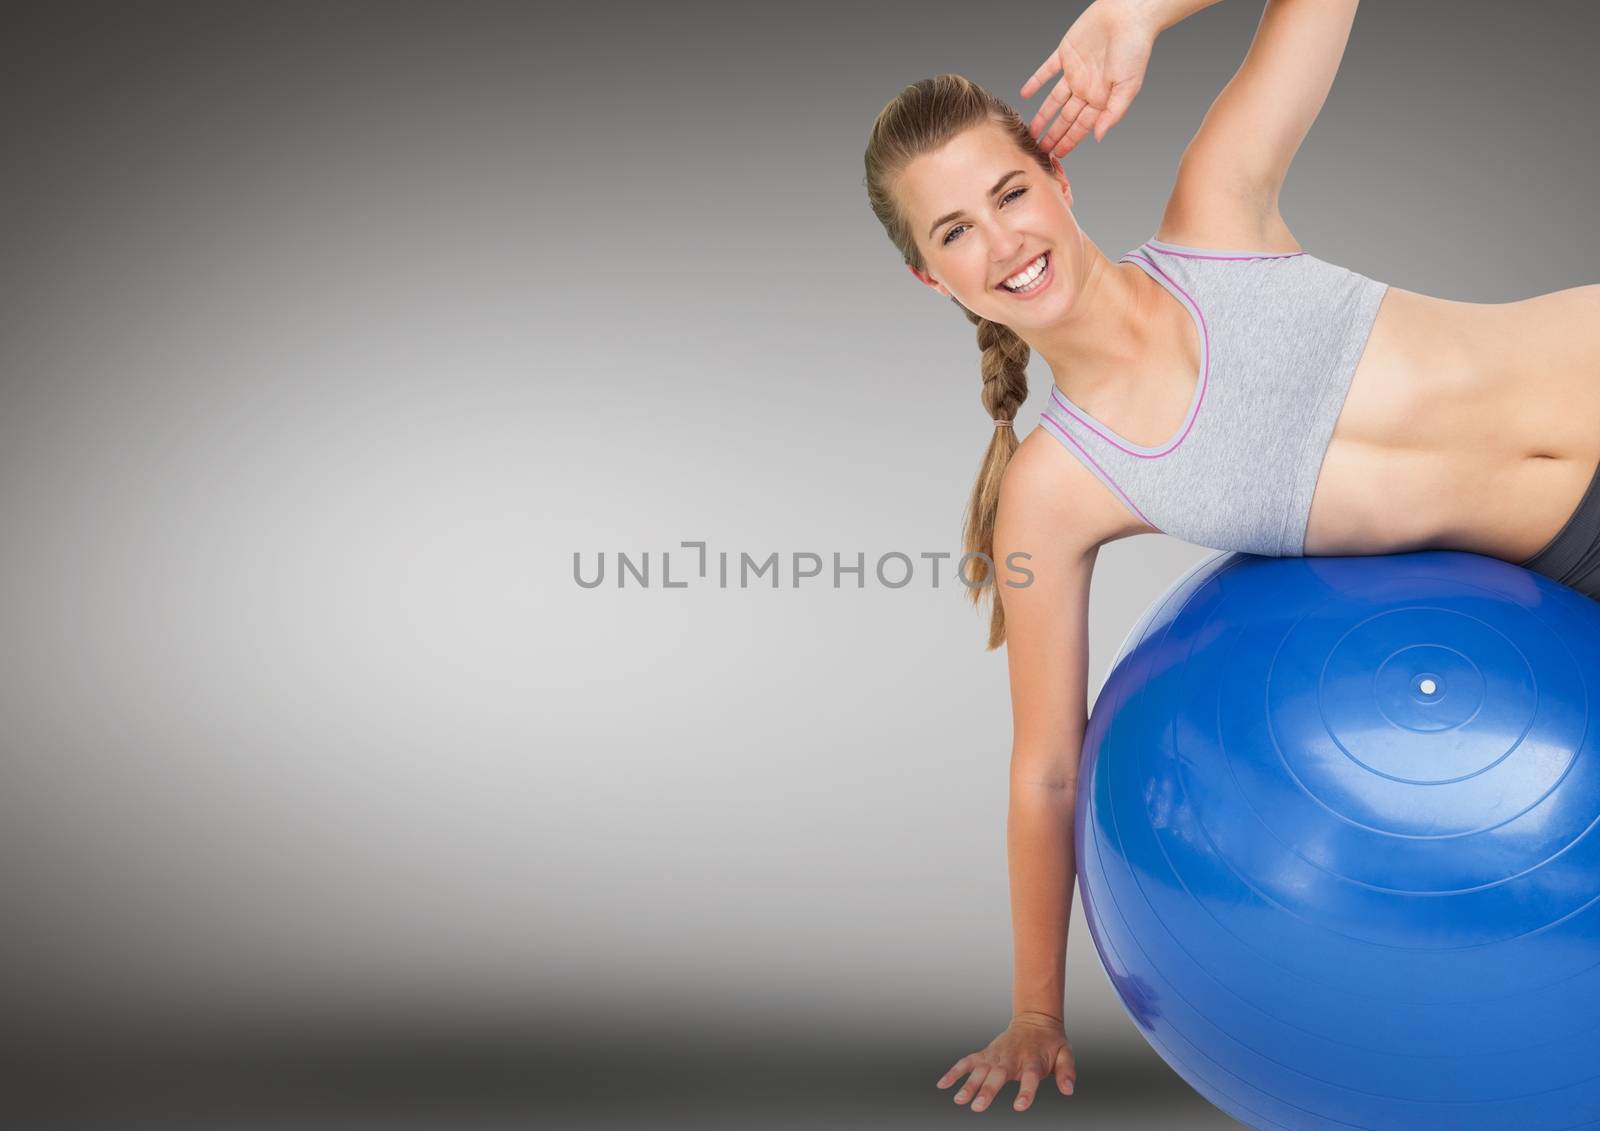 Portrait of woman performing exercise with fitness ball against grey background